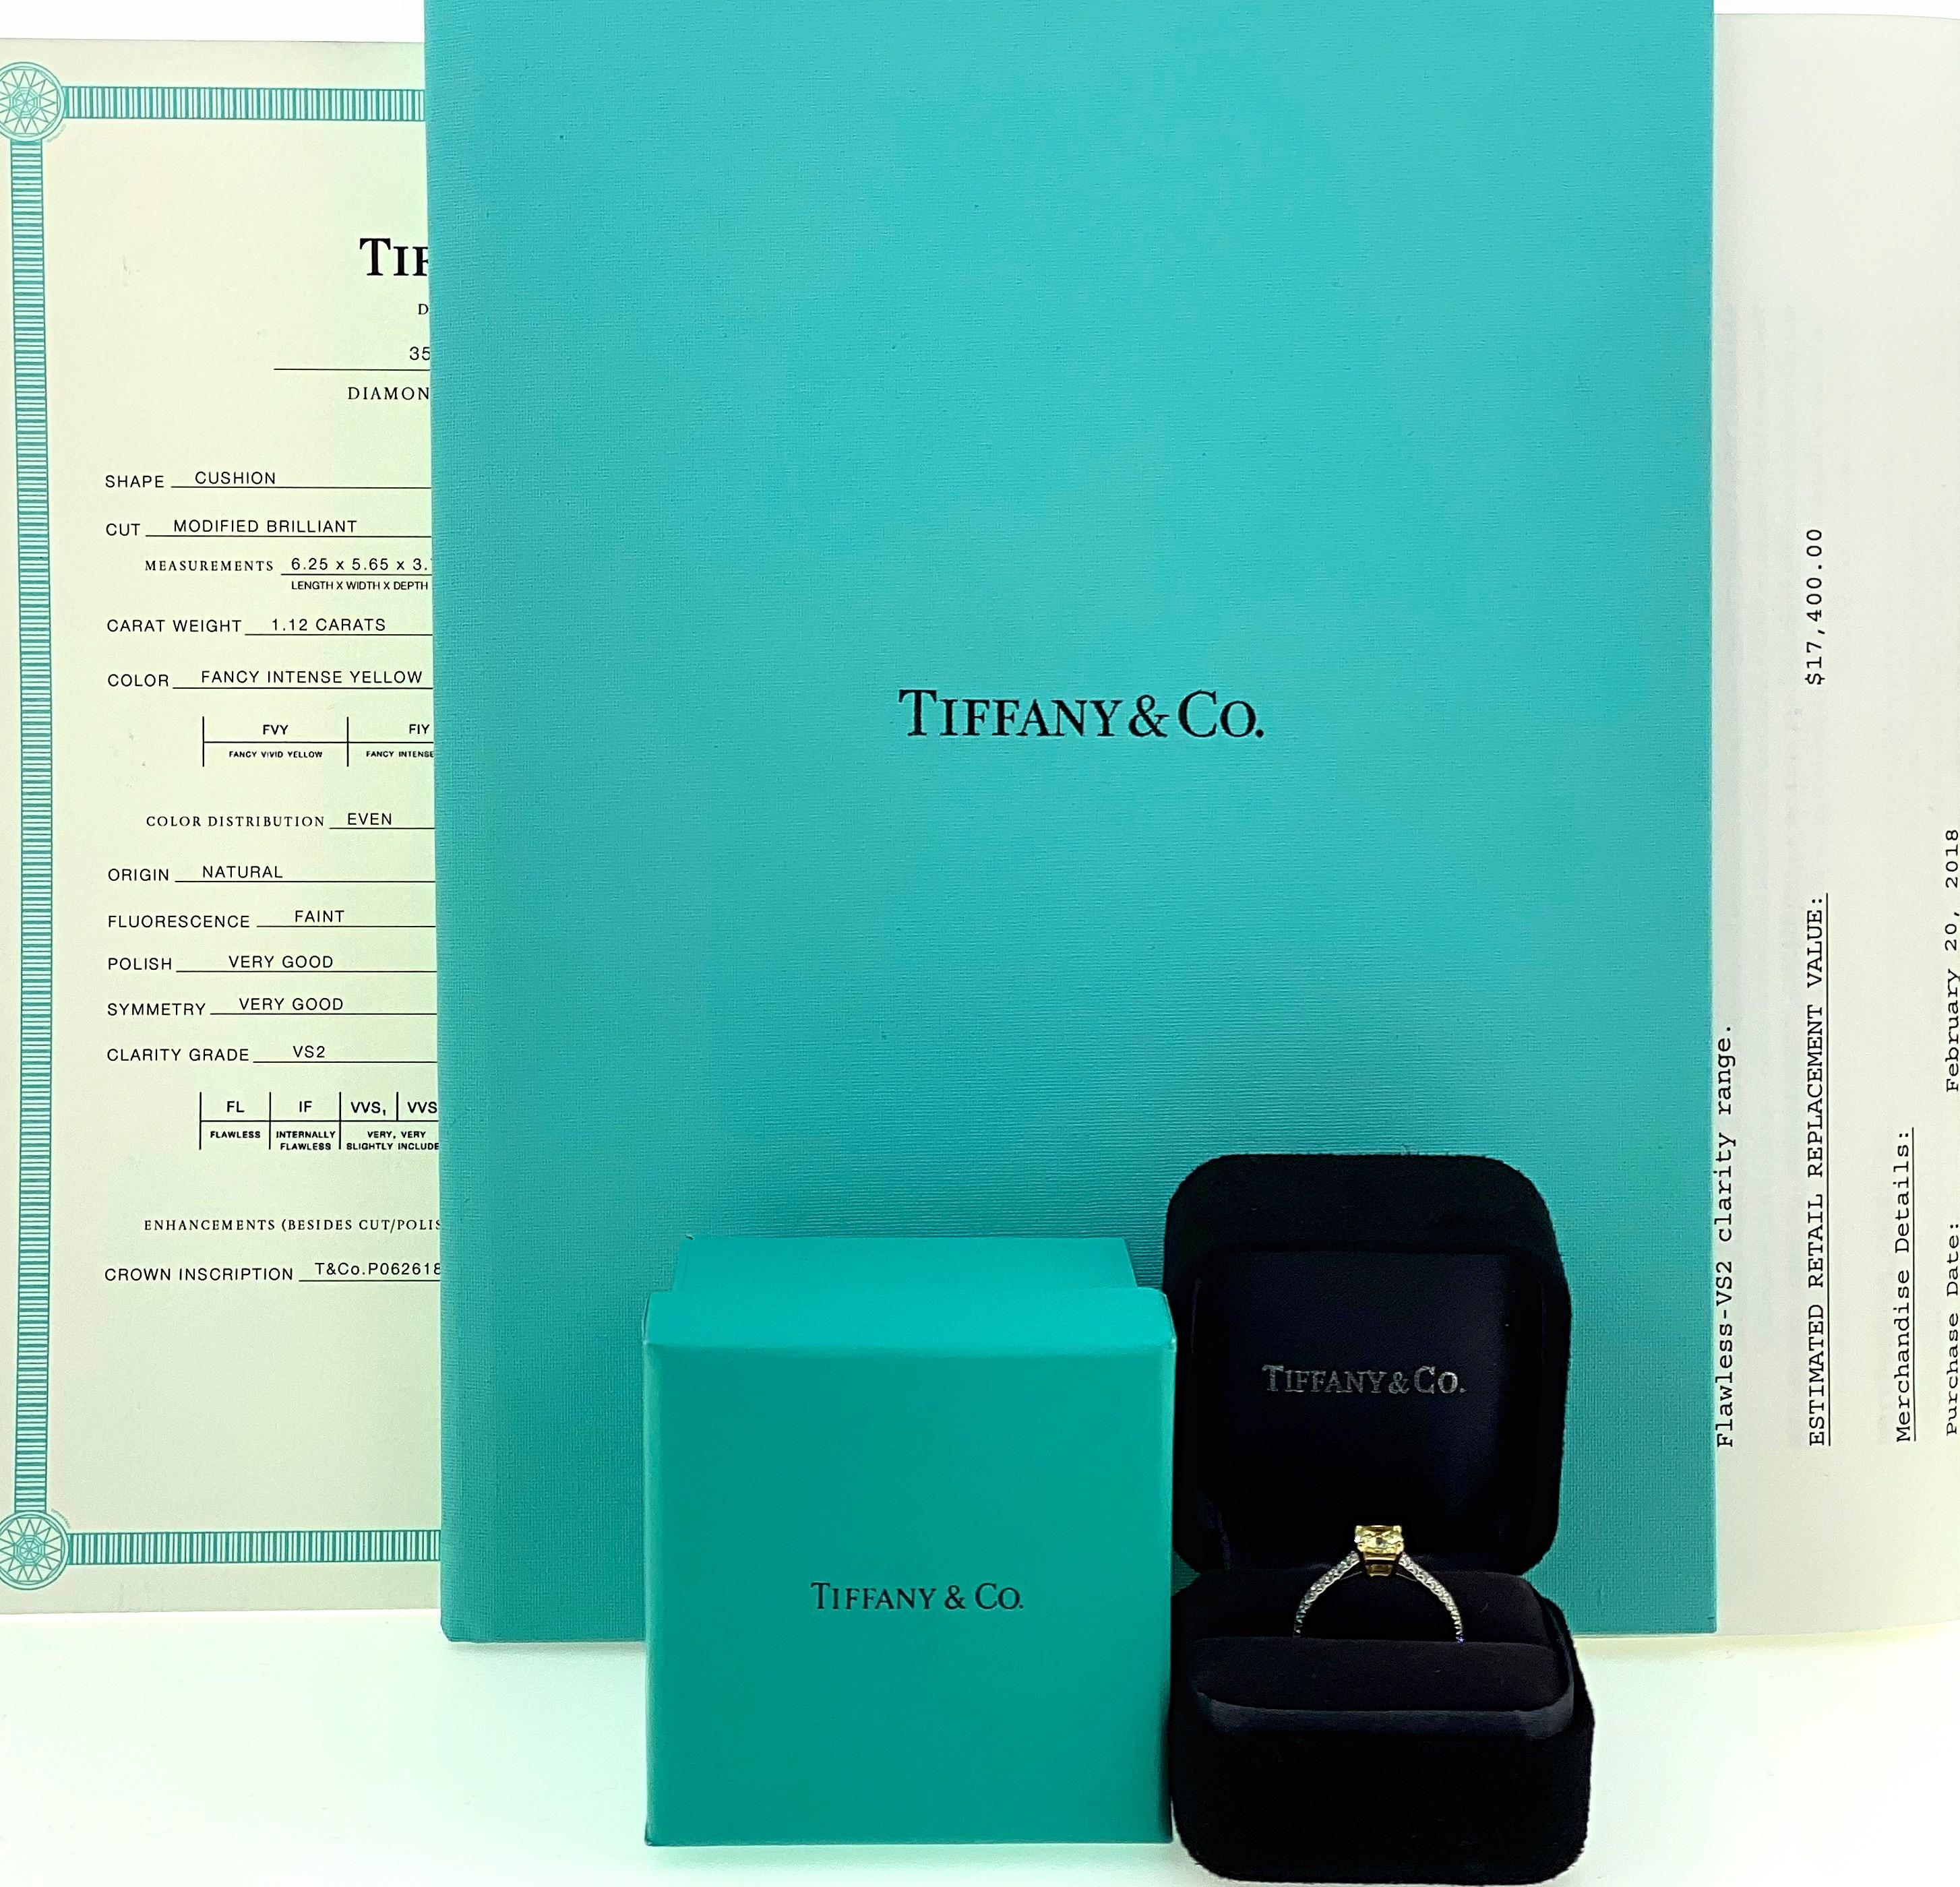 Tiffany & Co Novo Fancy Intense Yellow Diamond Engagement Ring
Style:  Solitaire with Accents
T&C Diamond Certificate:  35790357/P06261829
Metal:  Platinum PT950
Size:  6.75 sizable
TCW:  1.28 tcw
Main Diamond:  Cushion Modified Brilliant Diamond